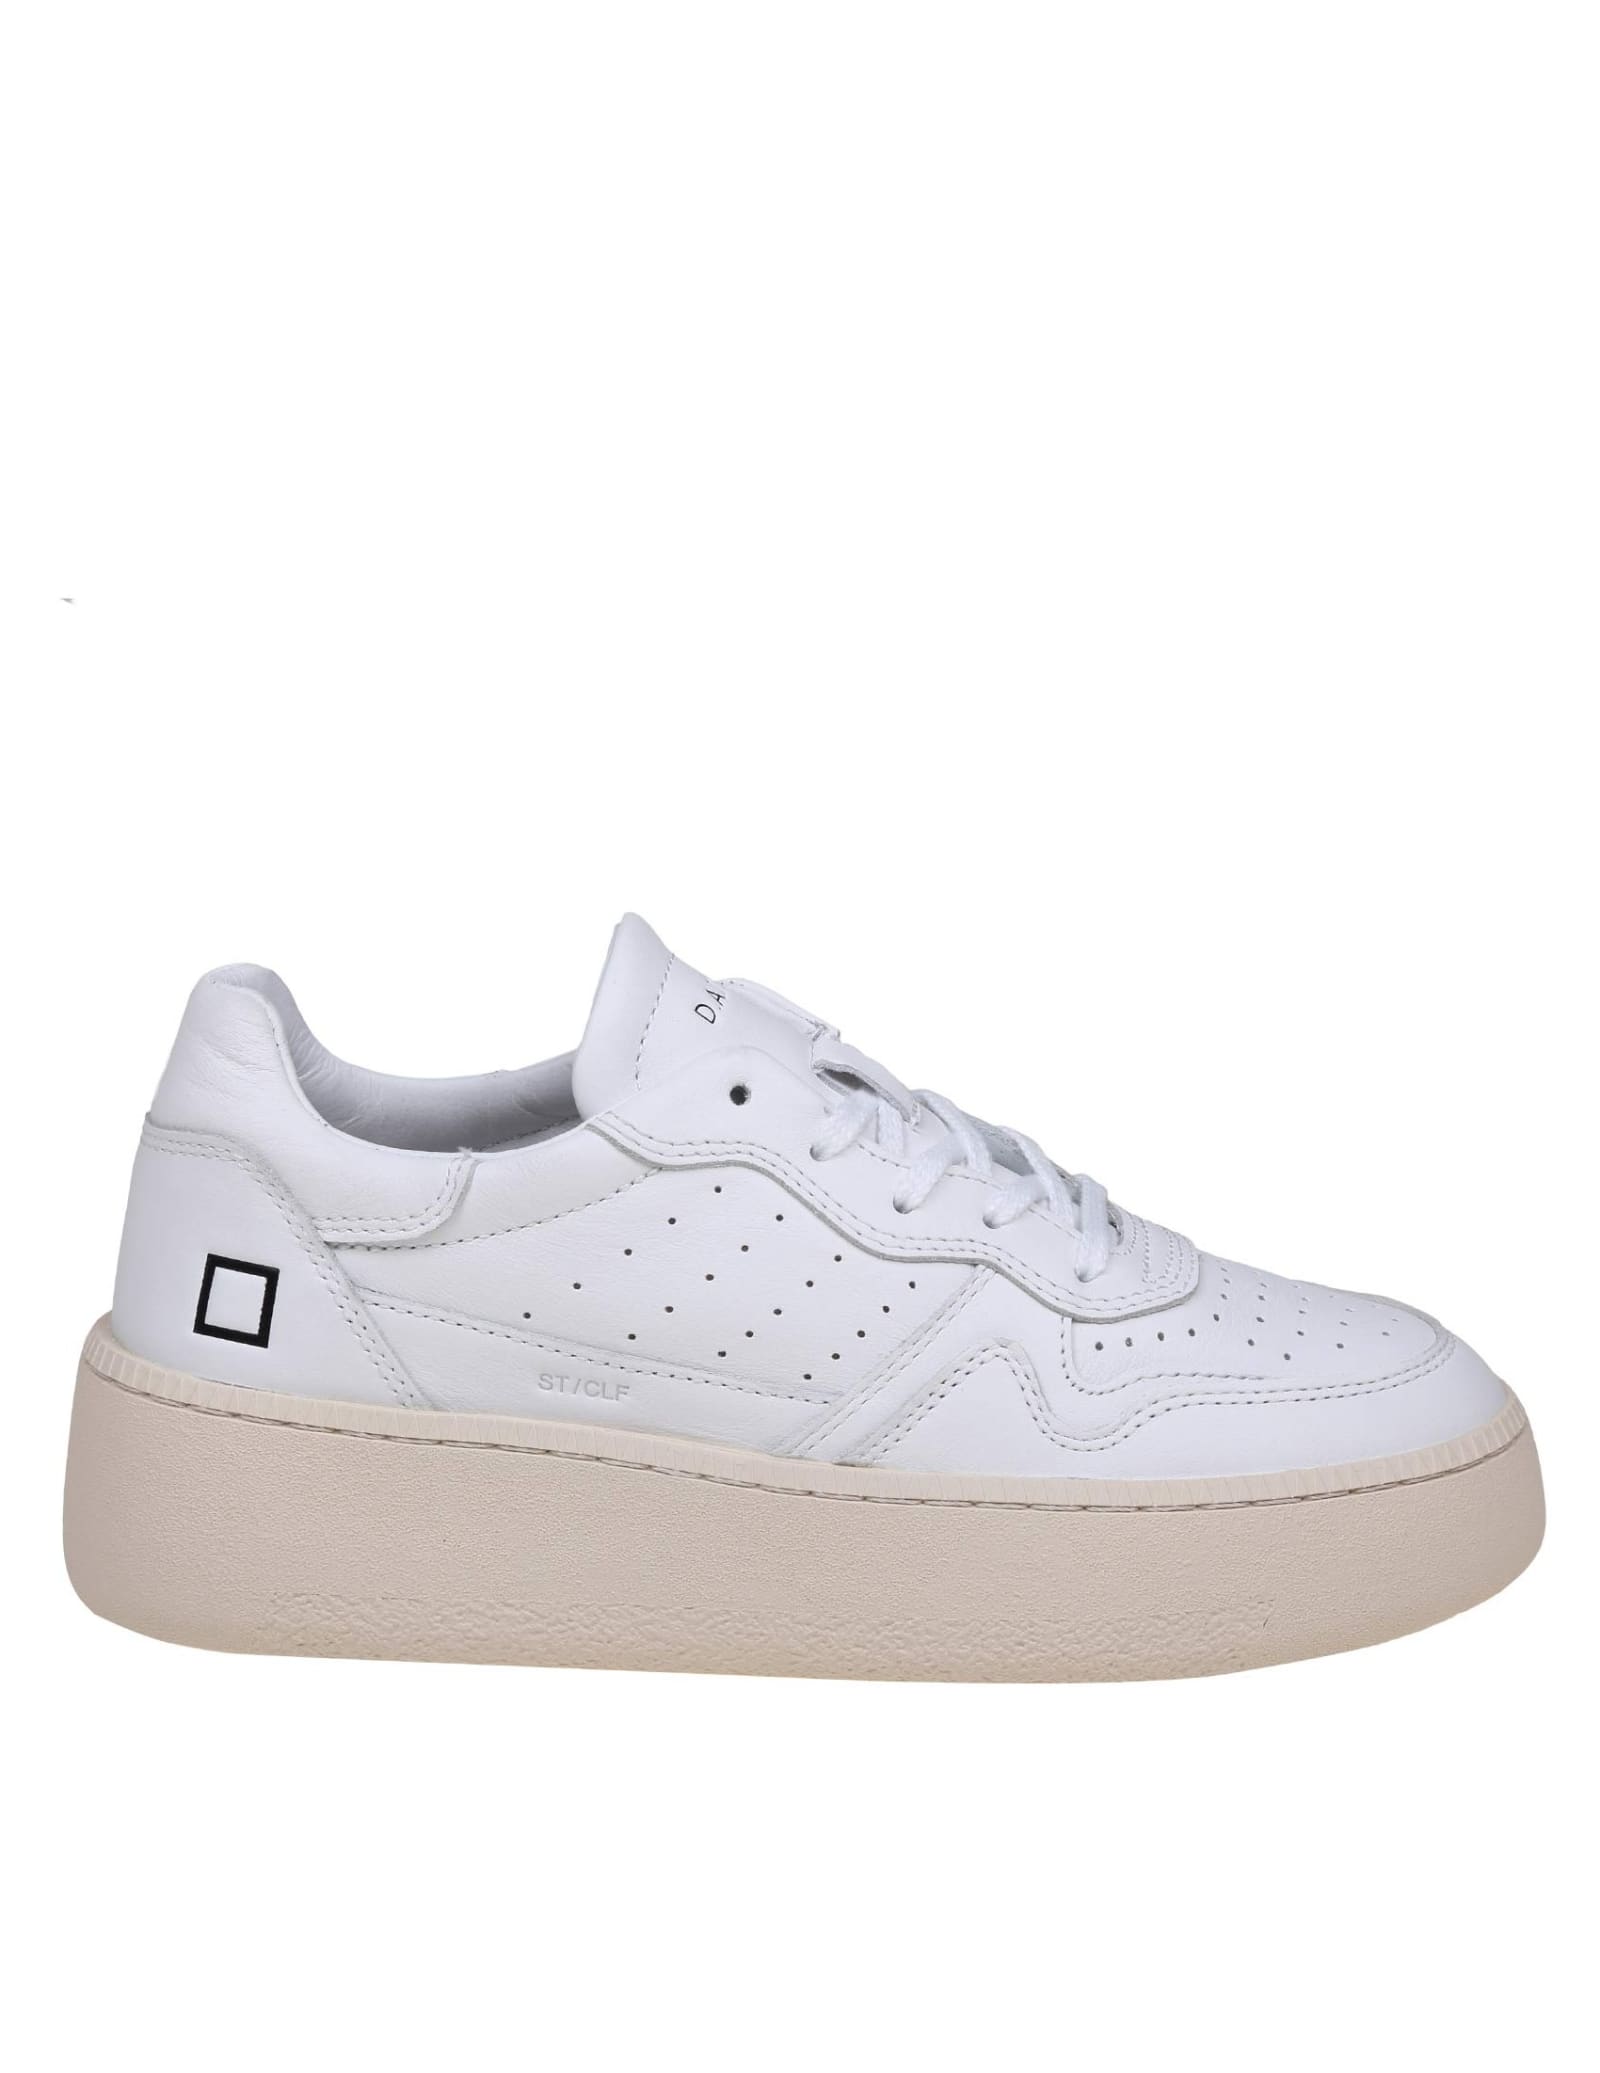 Shop Date Step Calf Sneakers In Leather And White Color